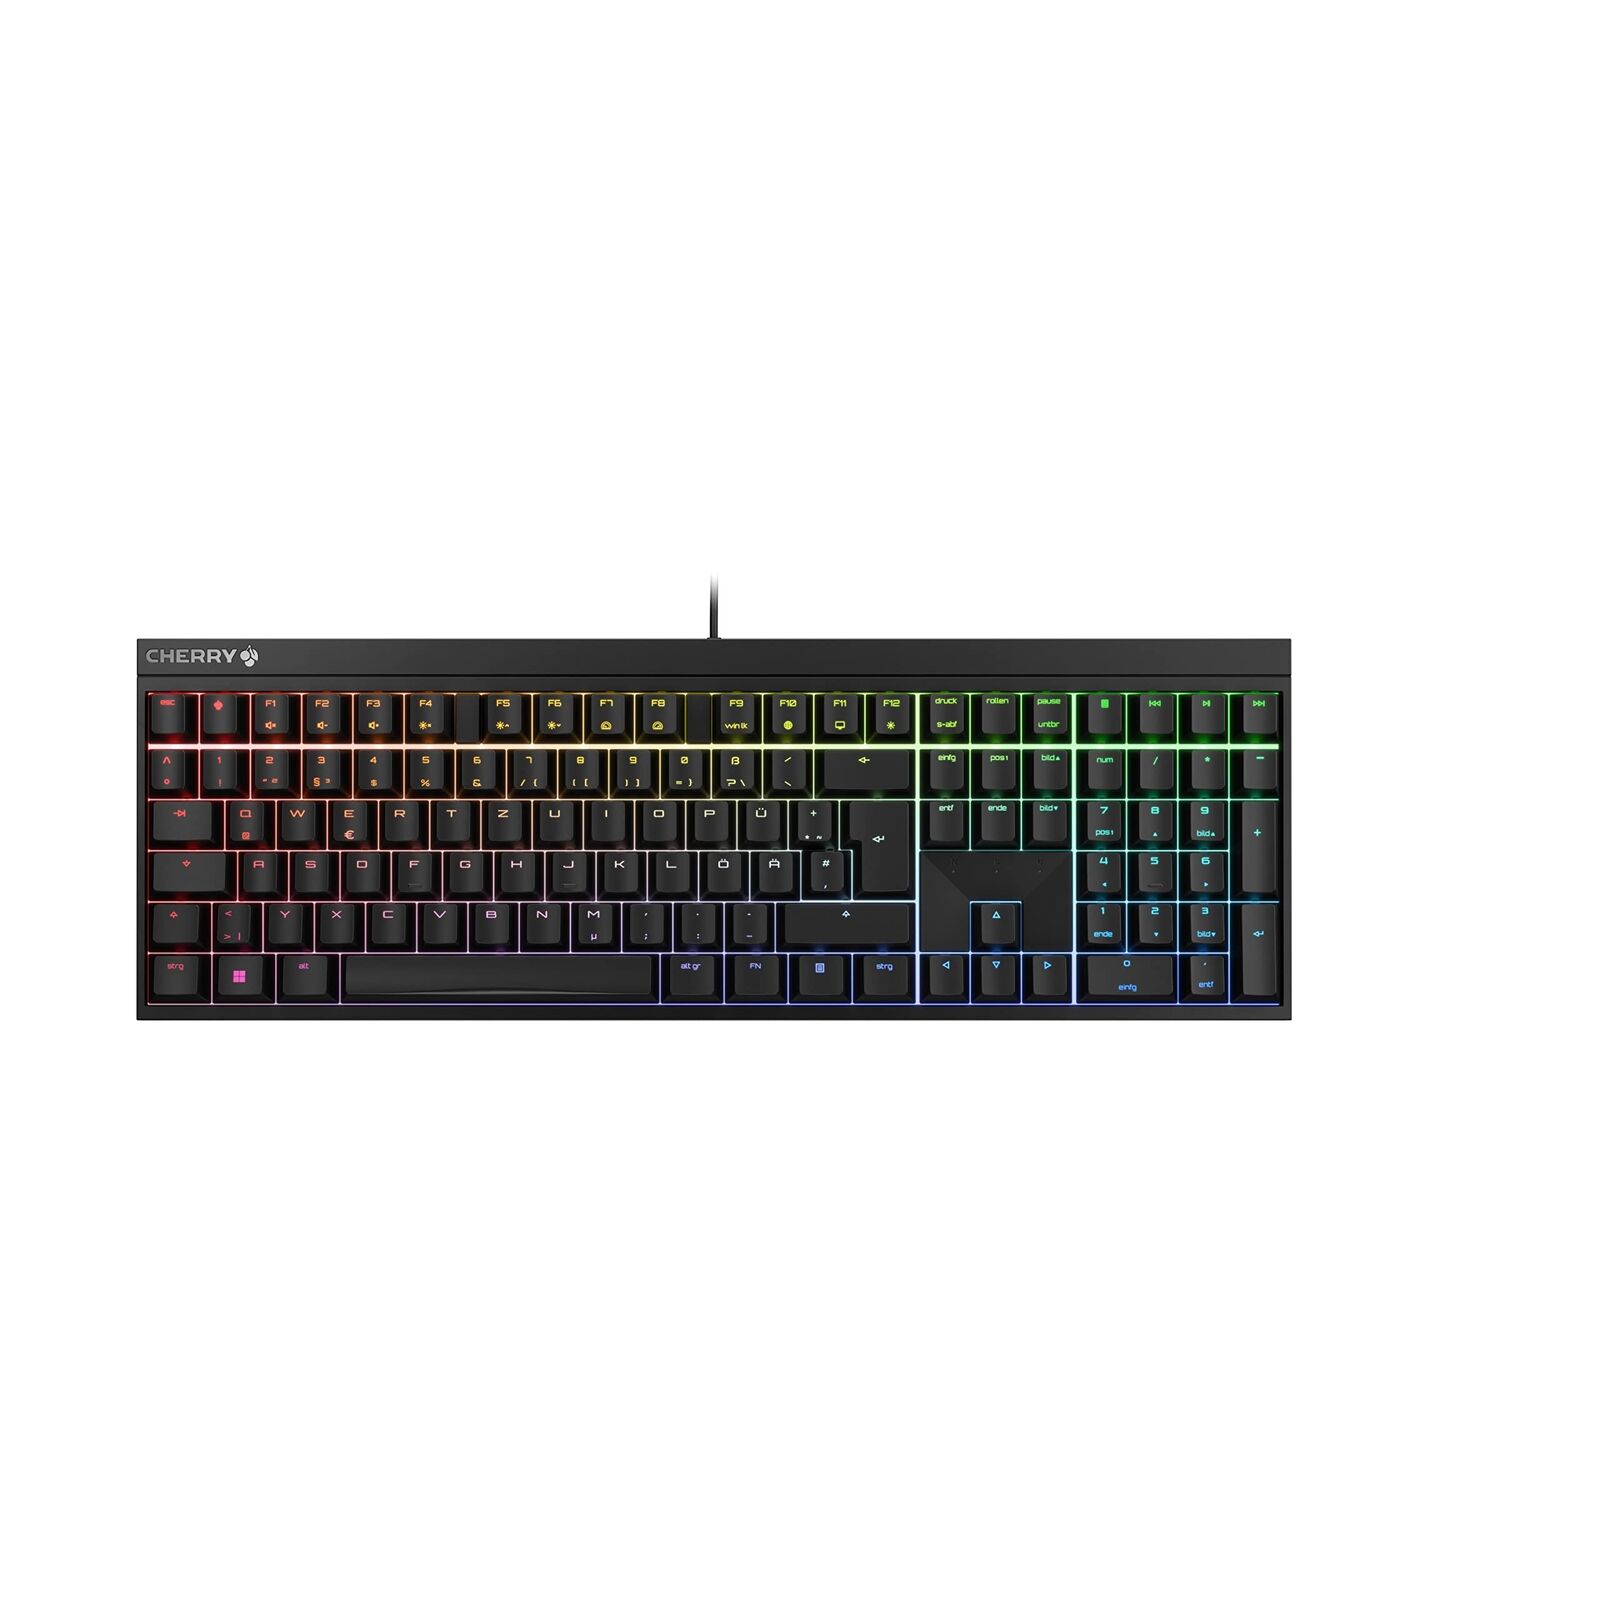 CHERRY MX 2.0S, Wired Gaming Keyboard with RGB Lighting, German Layout (QWERTZ),